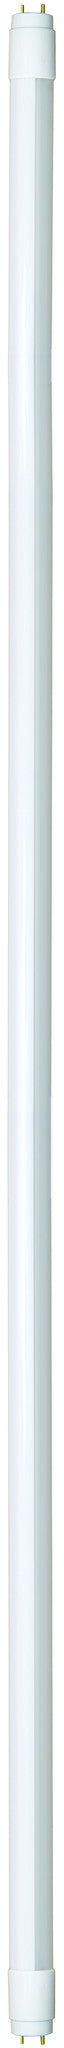 167372 - EcoWatts - Tube LED T8 G13 150cm 25W 4000K 2000Lm  The Lampco - The Lamp Company